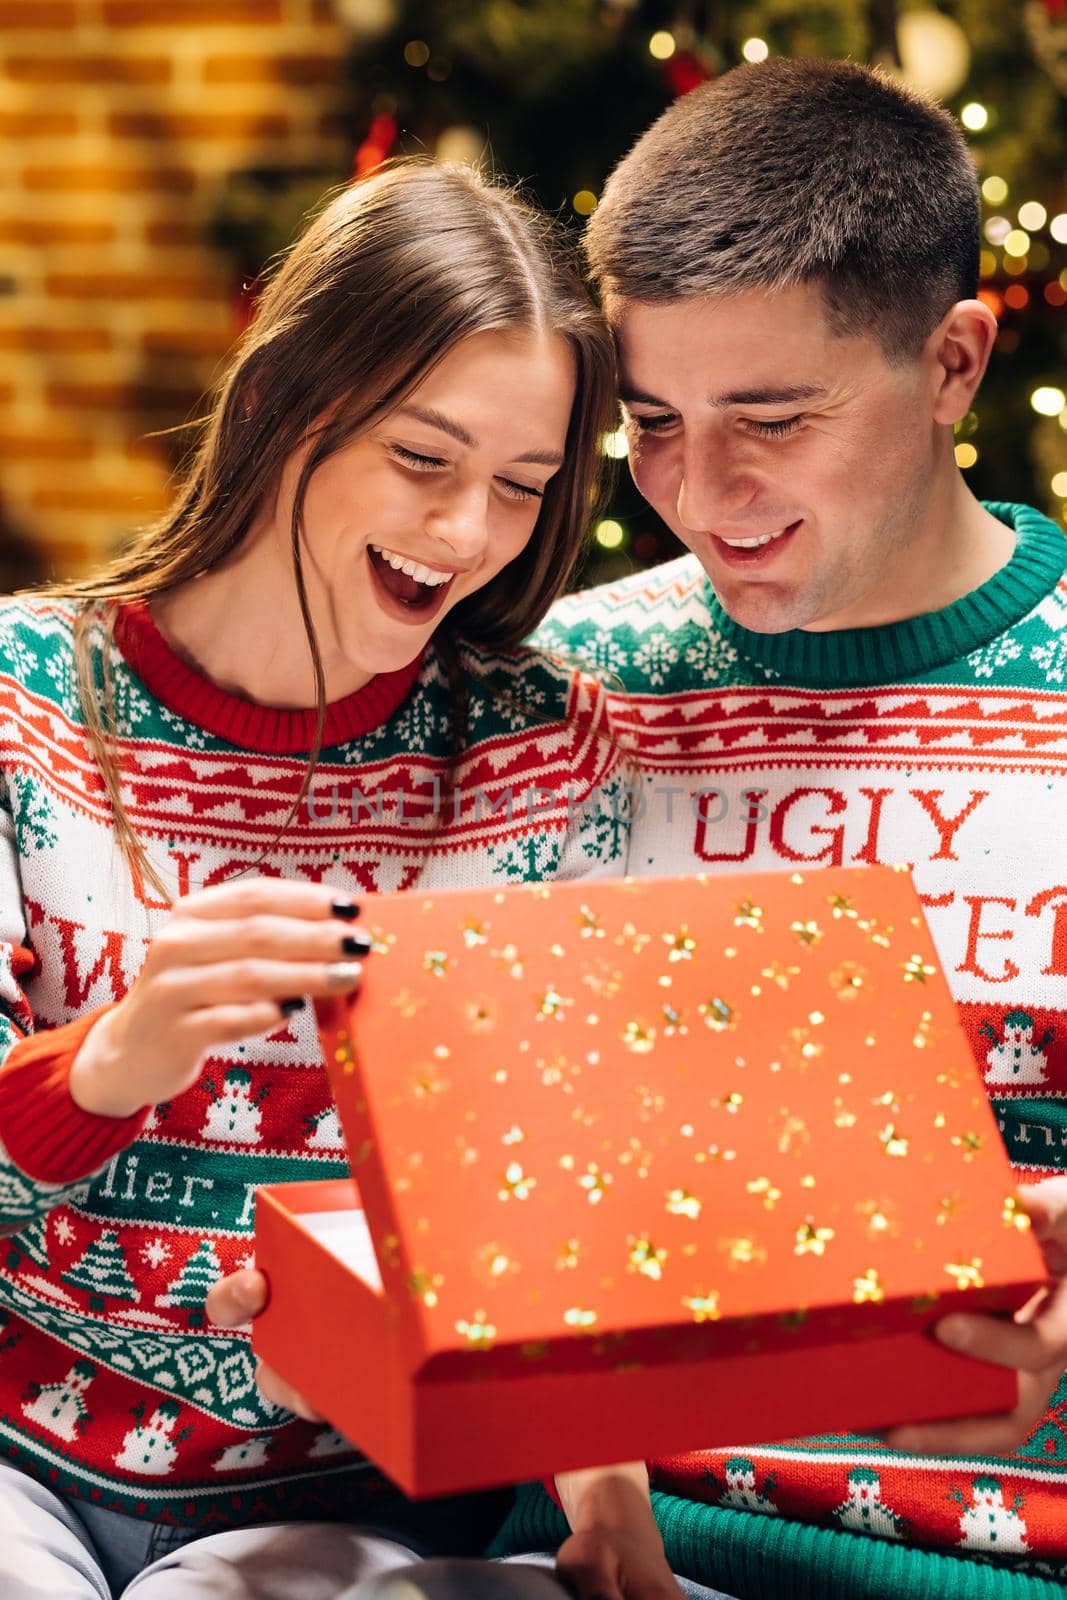 Woman is surprised and excited after opening received gift box. Happy man is making christmas gift to his beloved woman. Concept of holidays, romance, surprise. Holiday miracle.